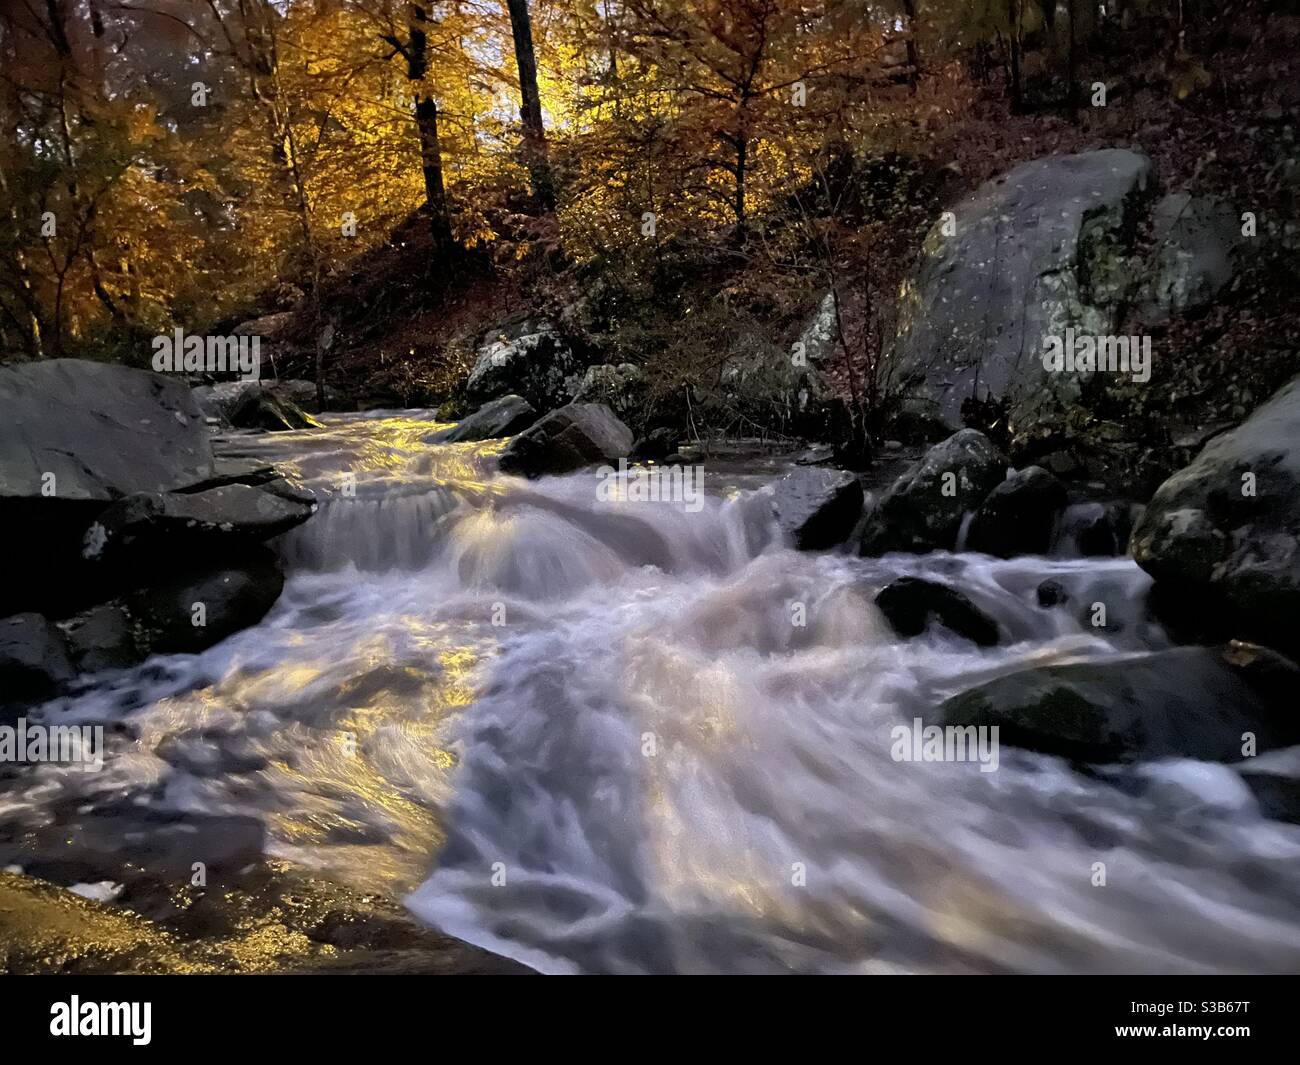 A creek flows over rocks and through a park under a streetlight in the fall. Stock Photo